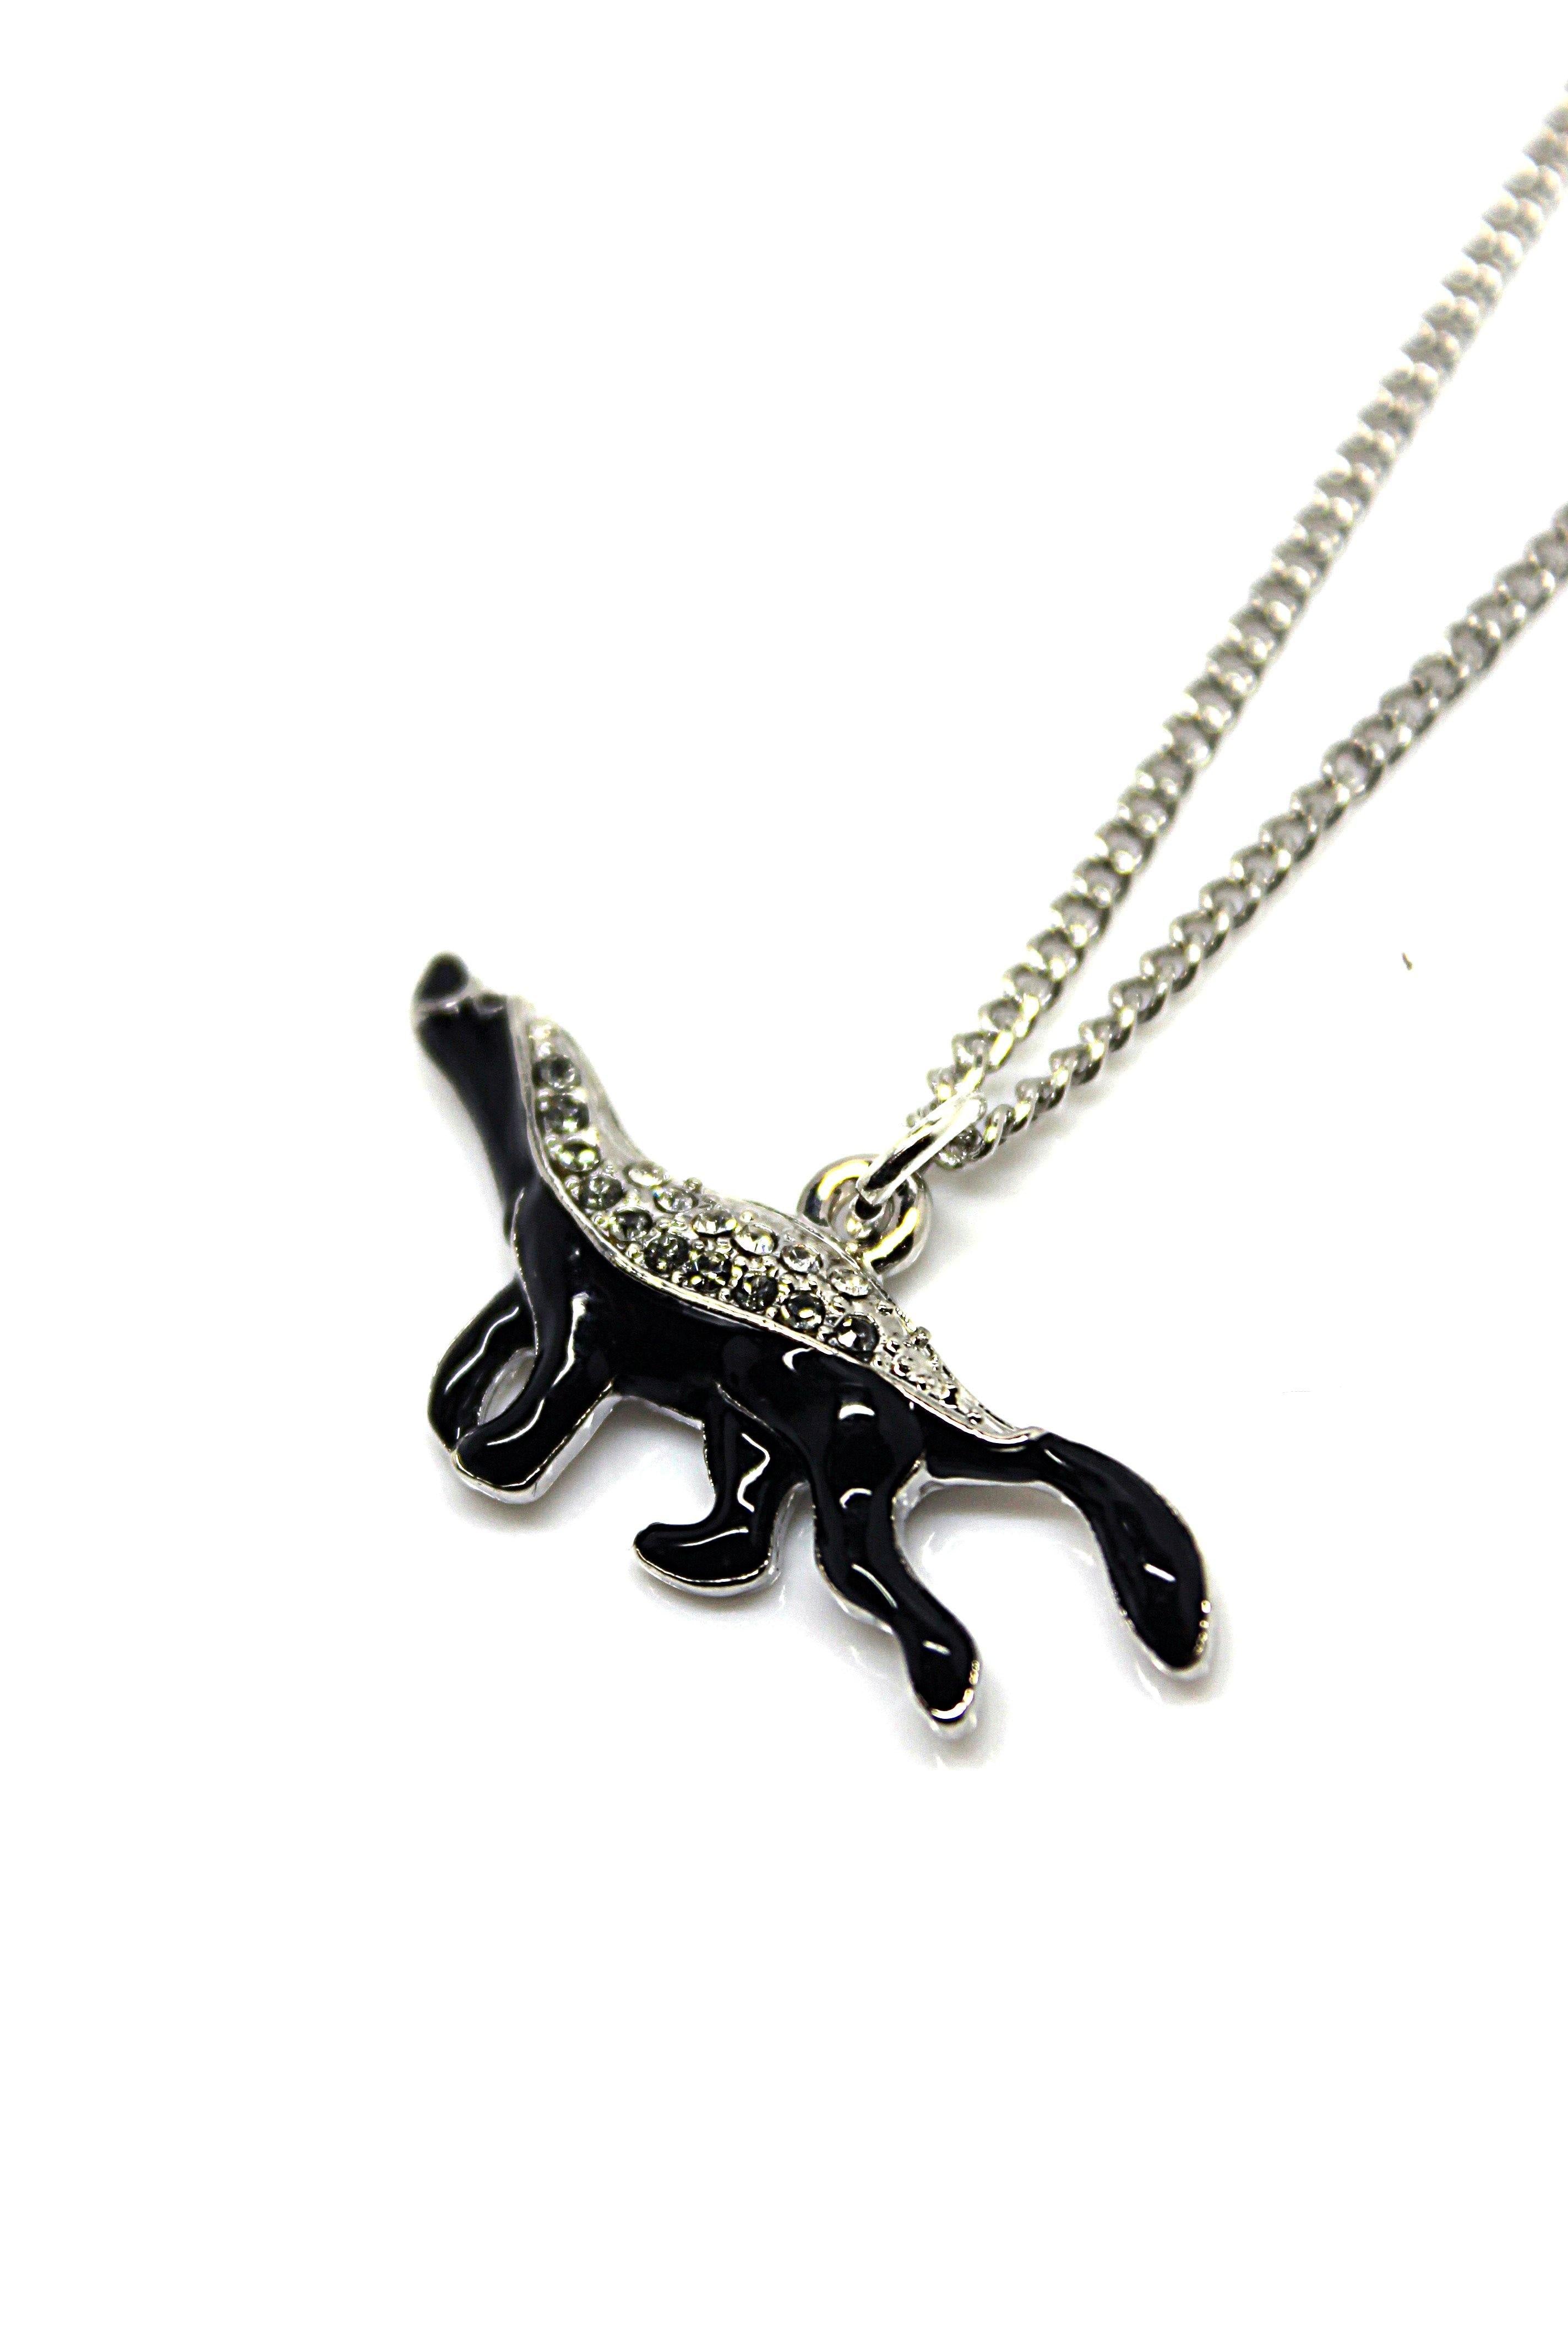 Honey Badger Necklace - Wildtouch - Wildtouch